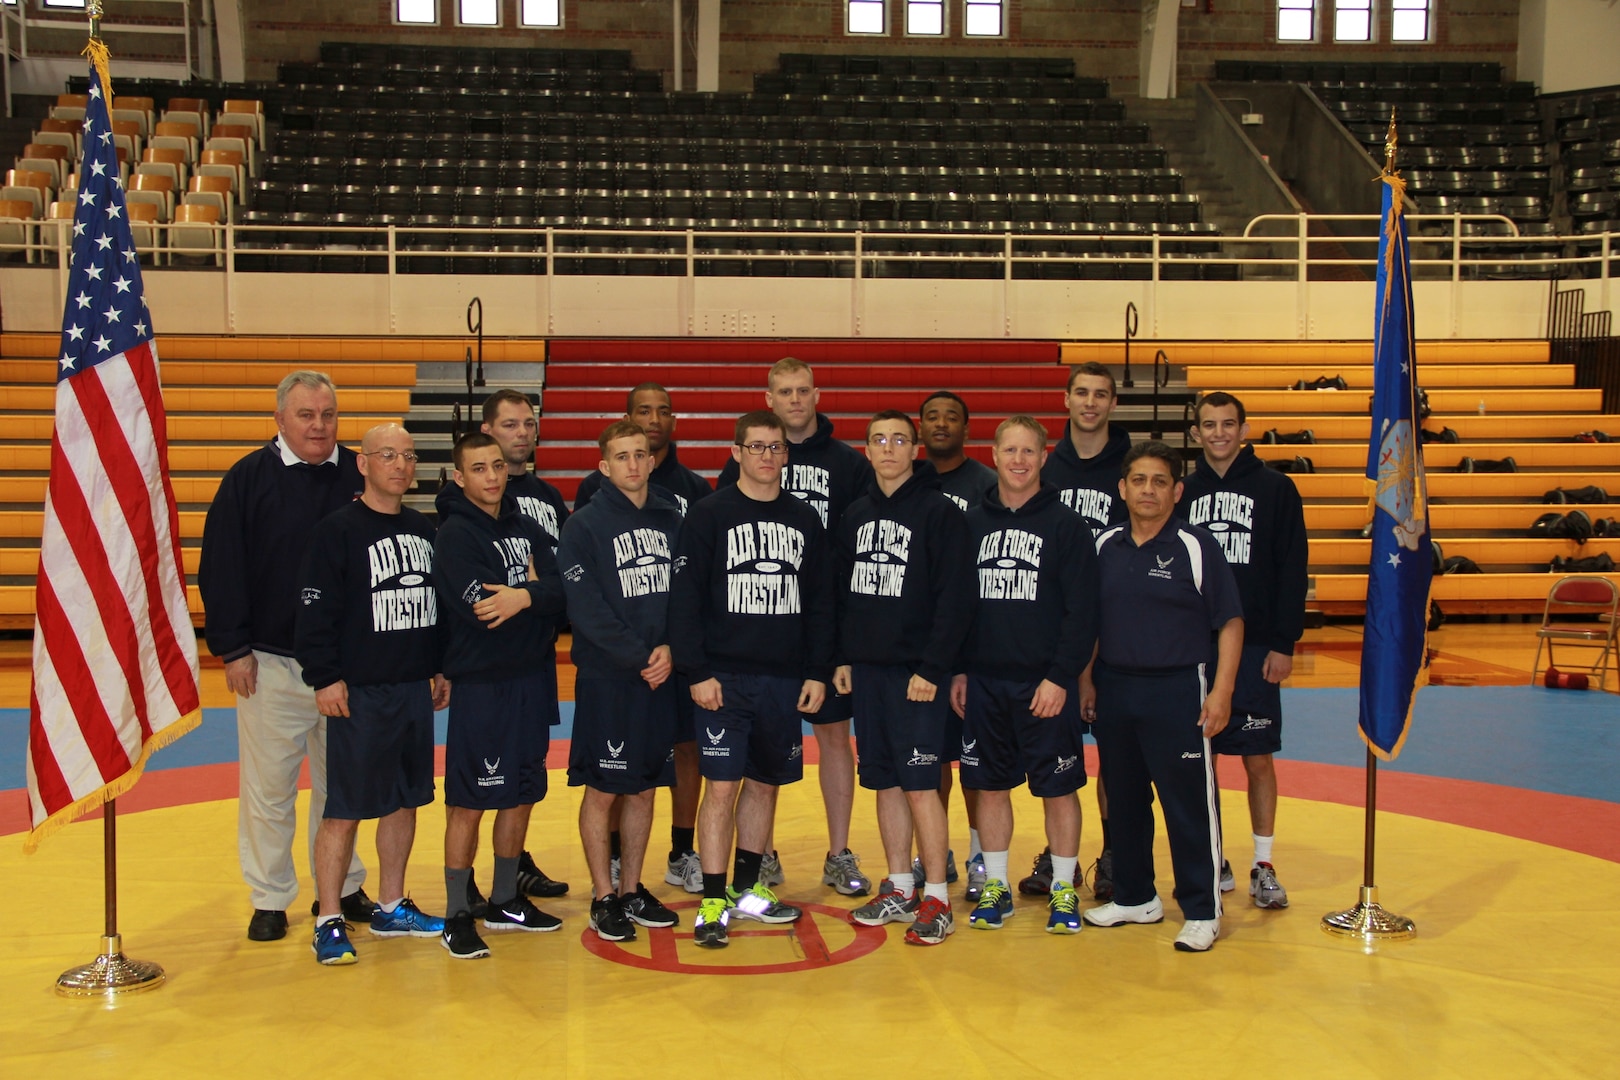 All-Air Force Wrestling team at the 2014 Armed Forces Wrestling Championship held at MCB Camp Lejeune, NC 7-8 March.  